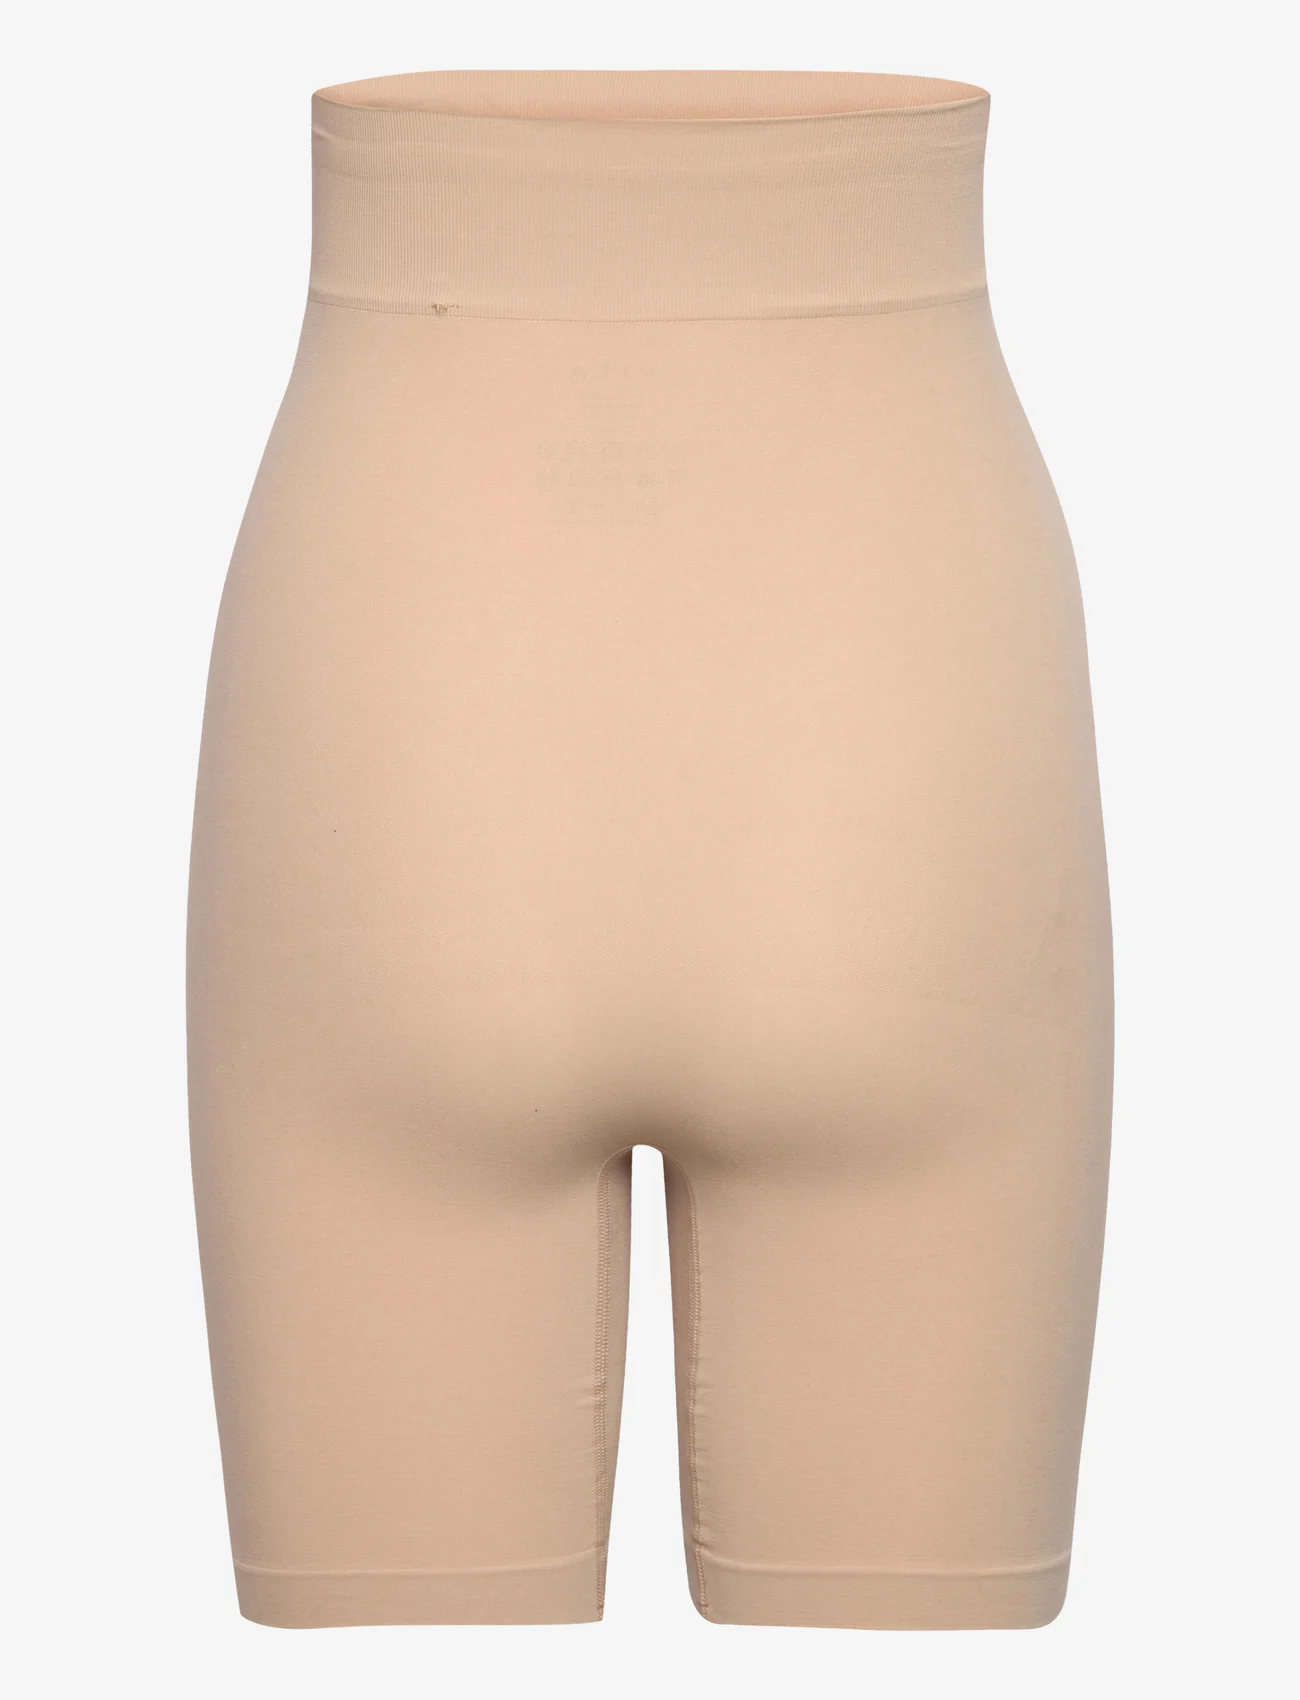 Vila - VIMACIE SEAMLESS SHAPING SHORTS/EF - lowest prices - cuban sand - 1